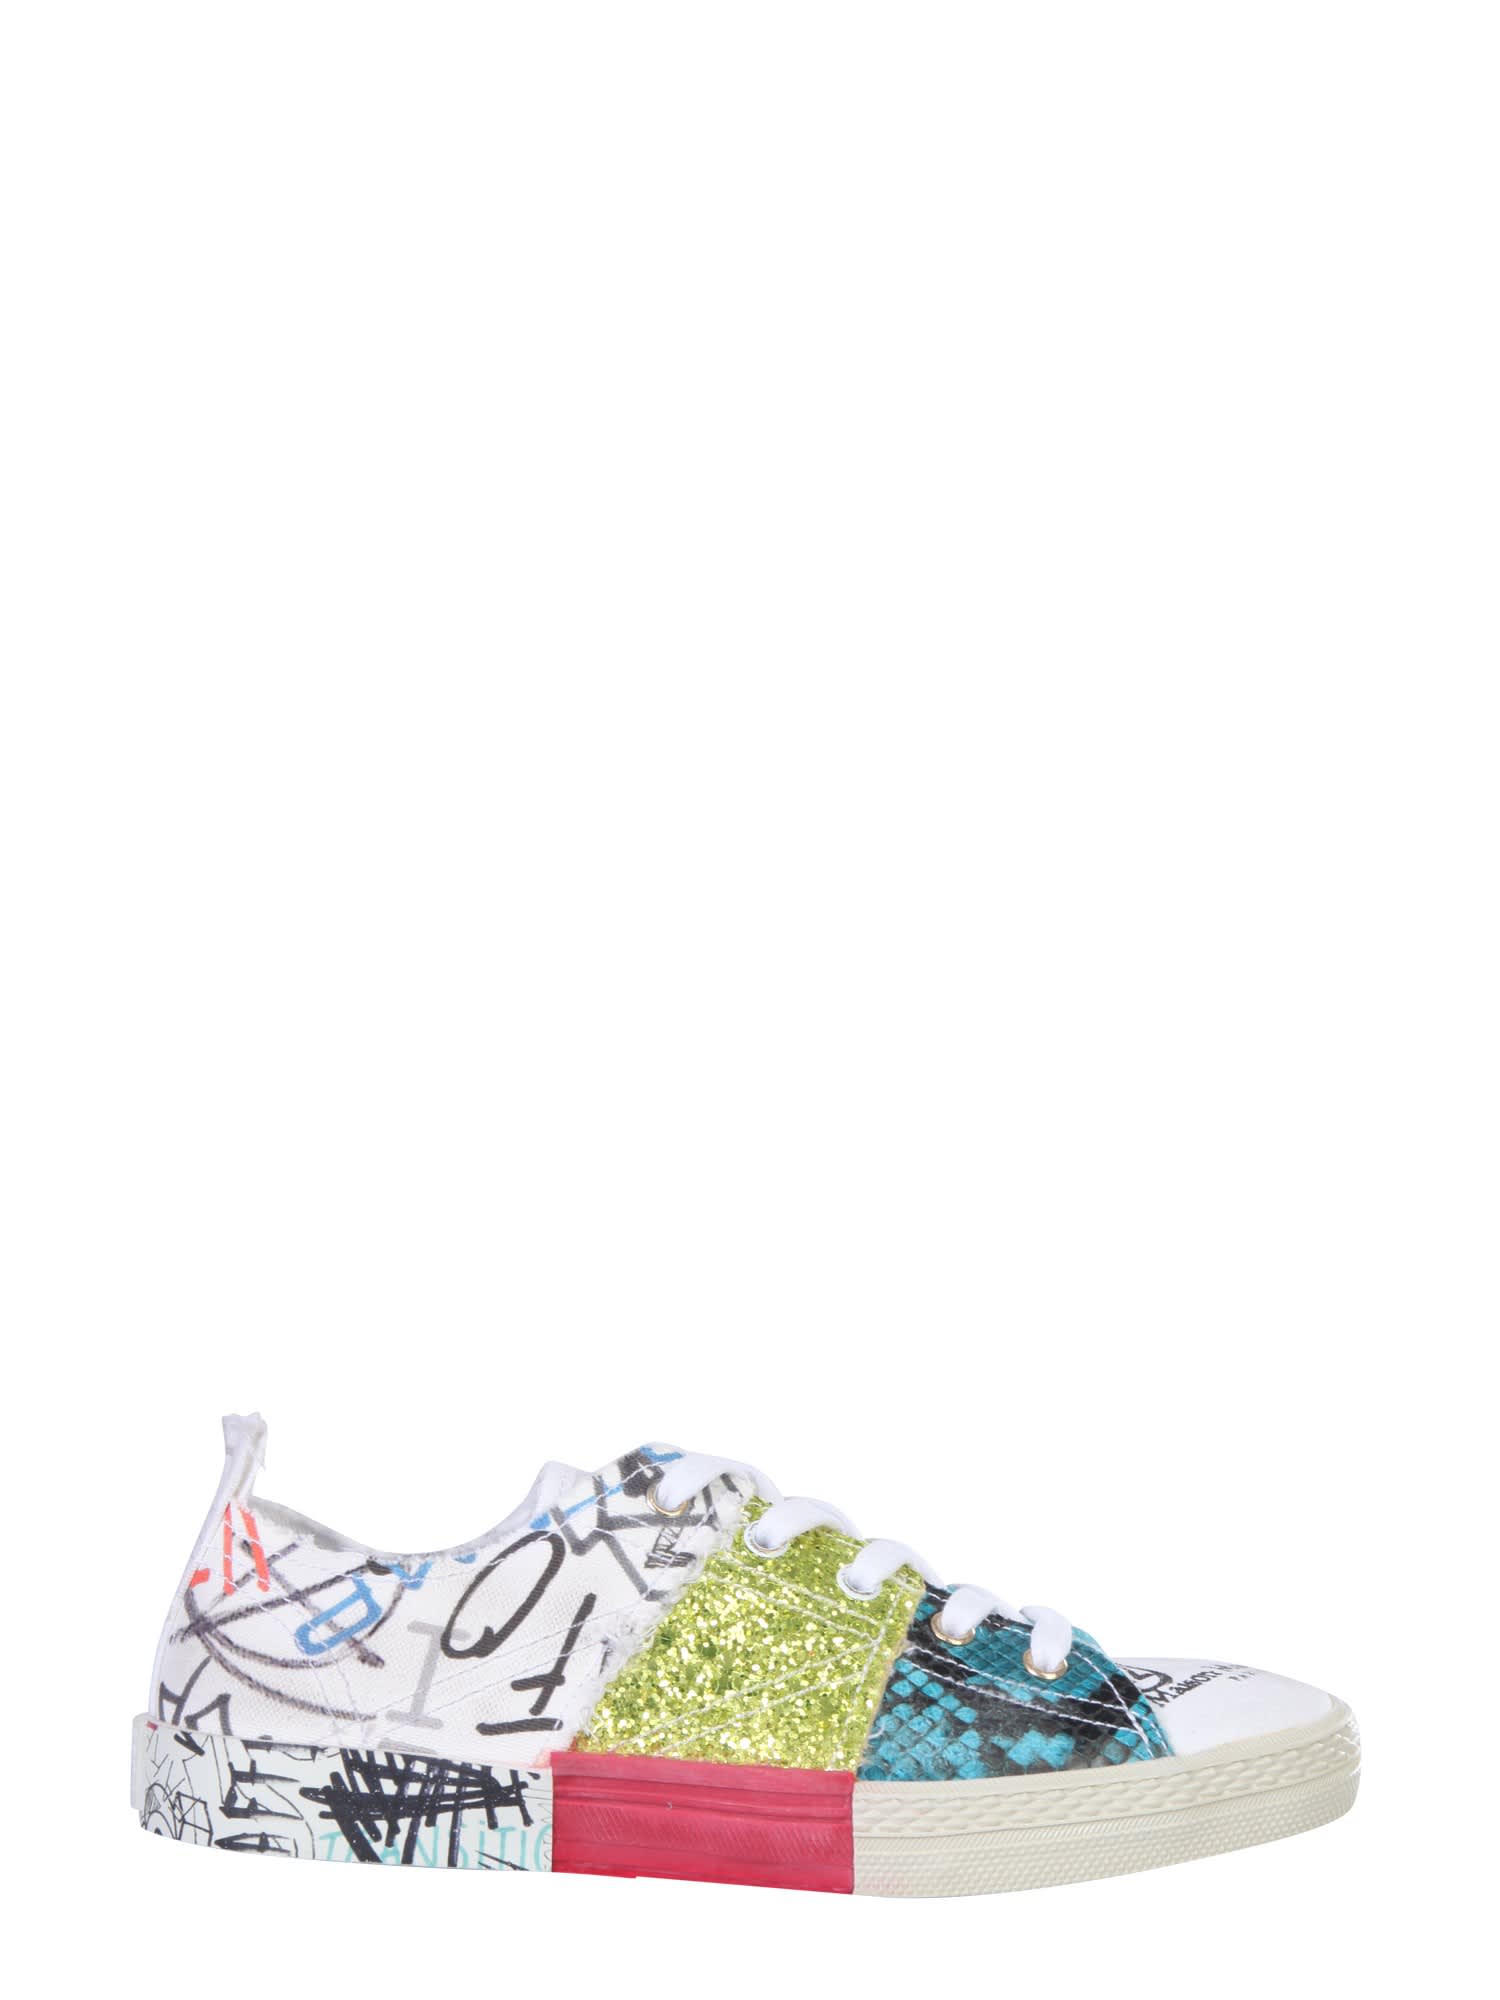 Buy Maison Margiela Patchwork Sneakers online, shop Maison Margiela shoes with free shipping